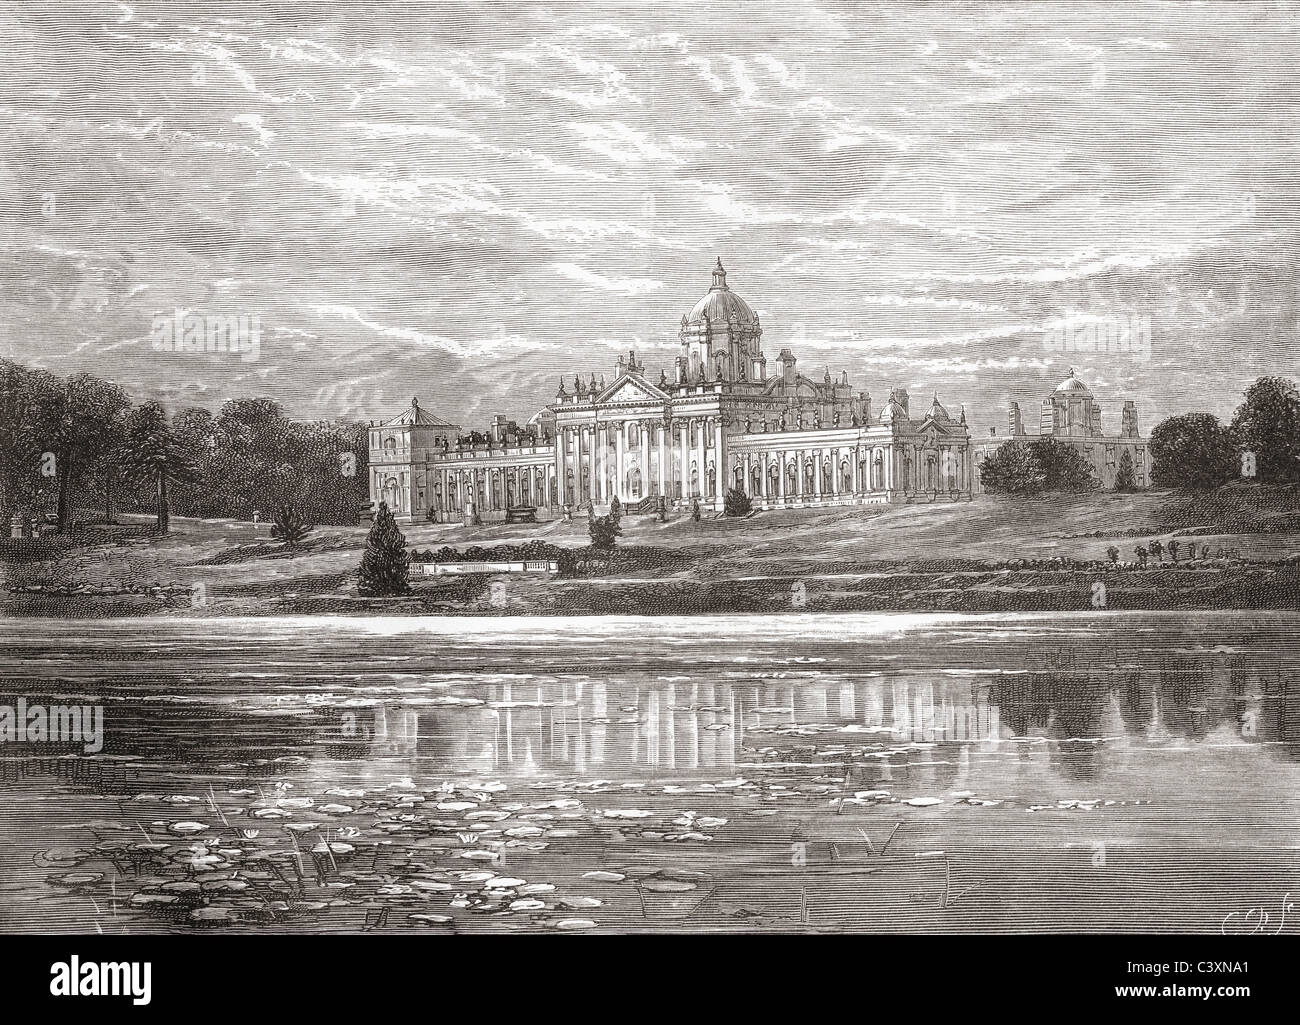 The south front of Castle Howard, North Yorkshire, England in the late 19th century. From Our Own Country published 1898. Stock Photo